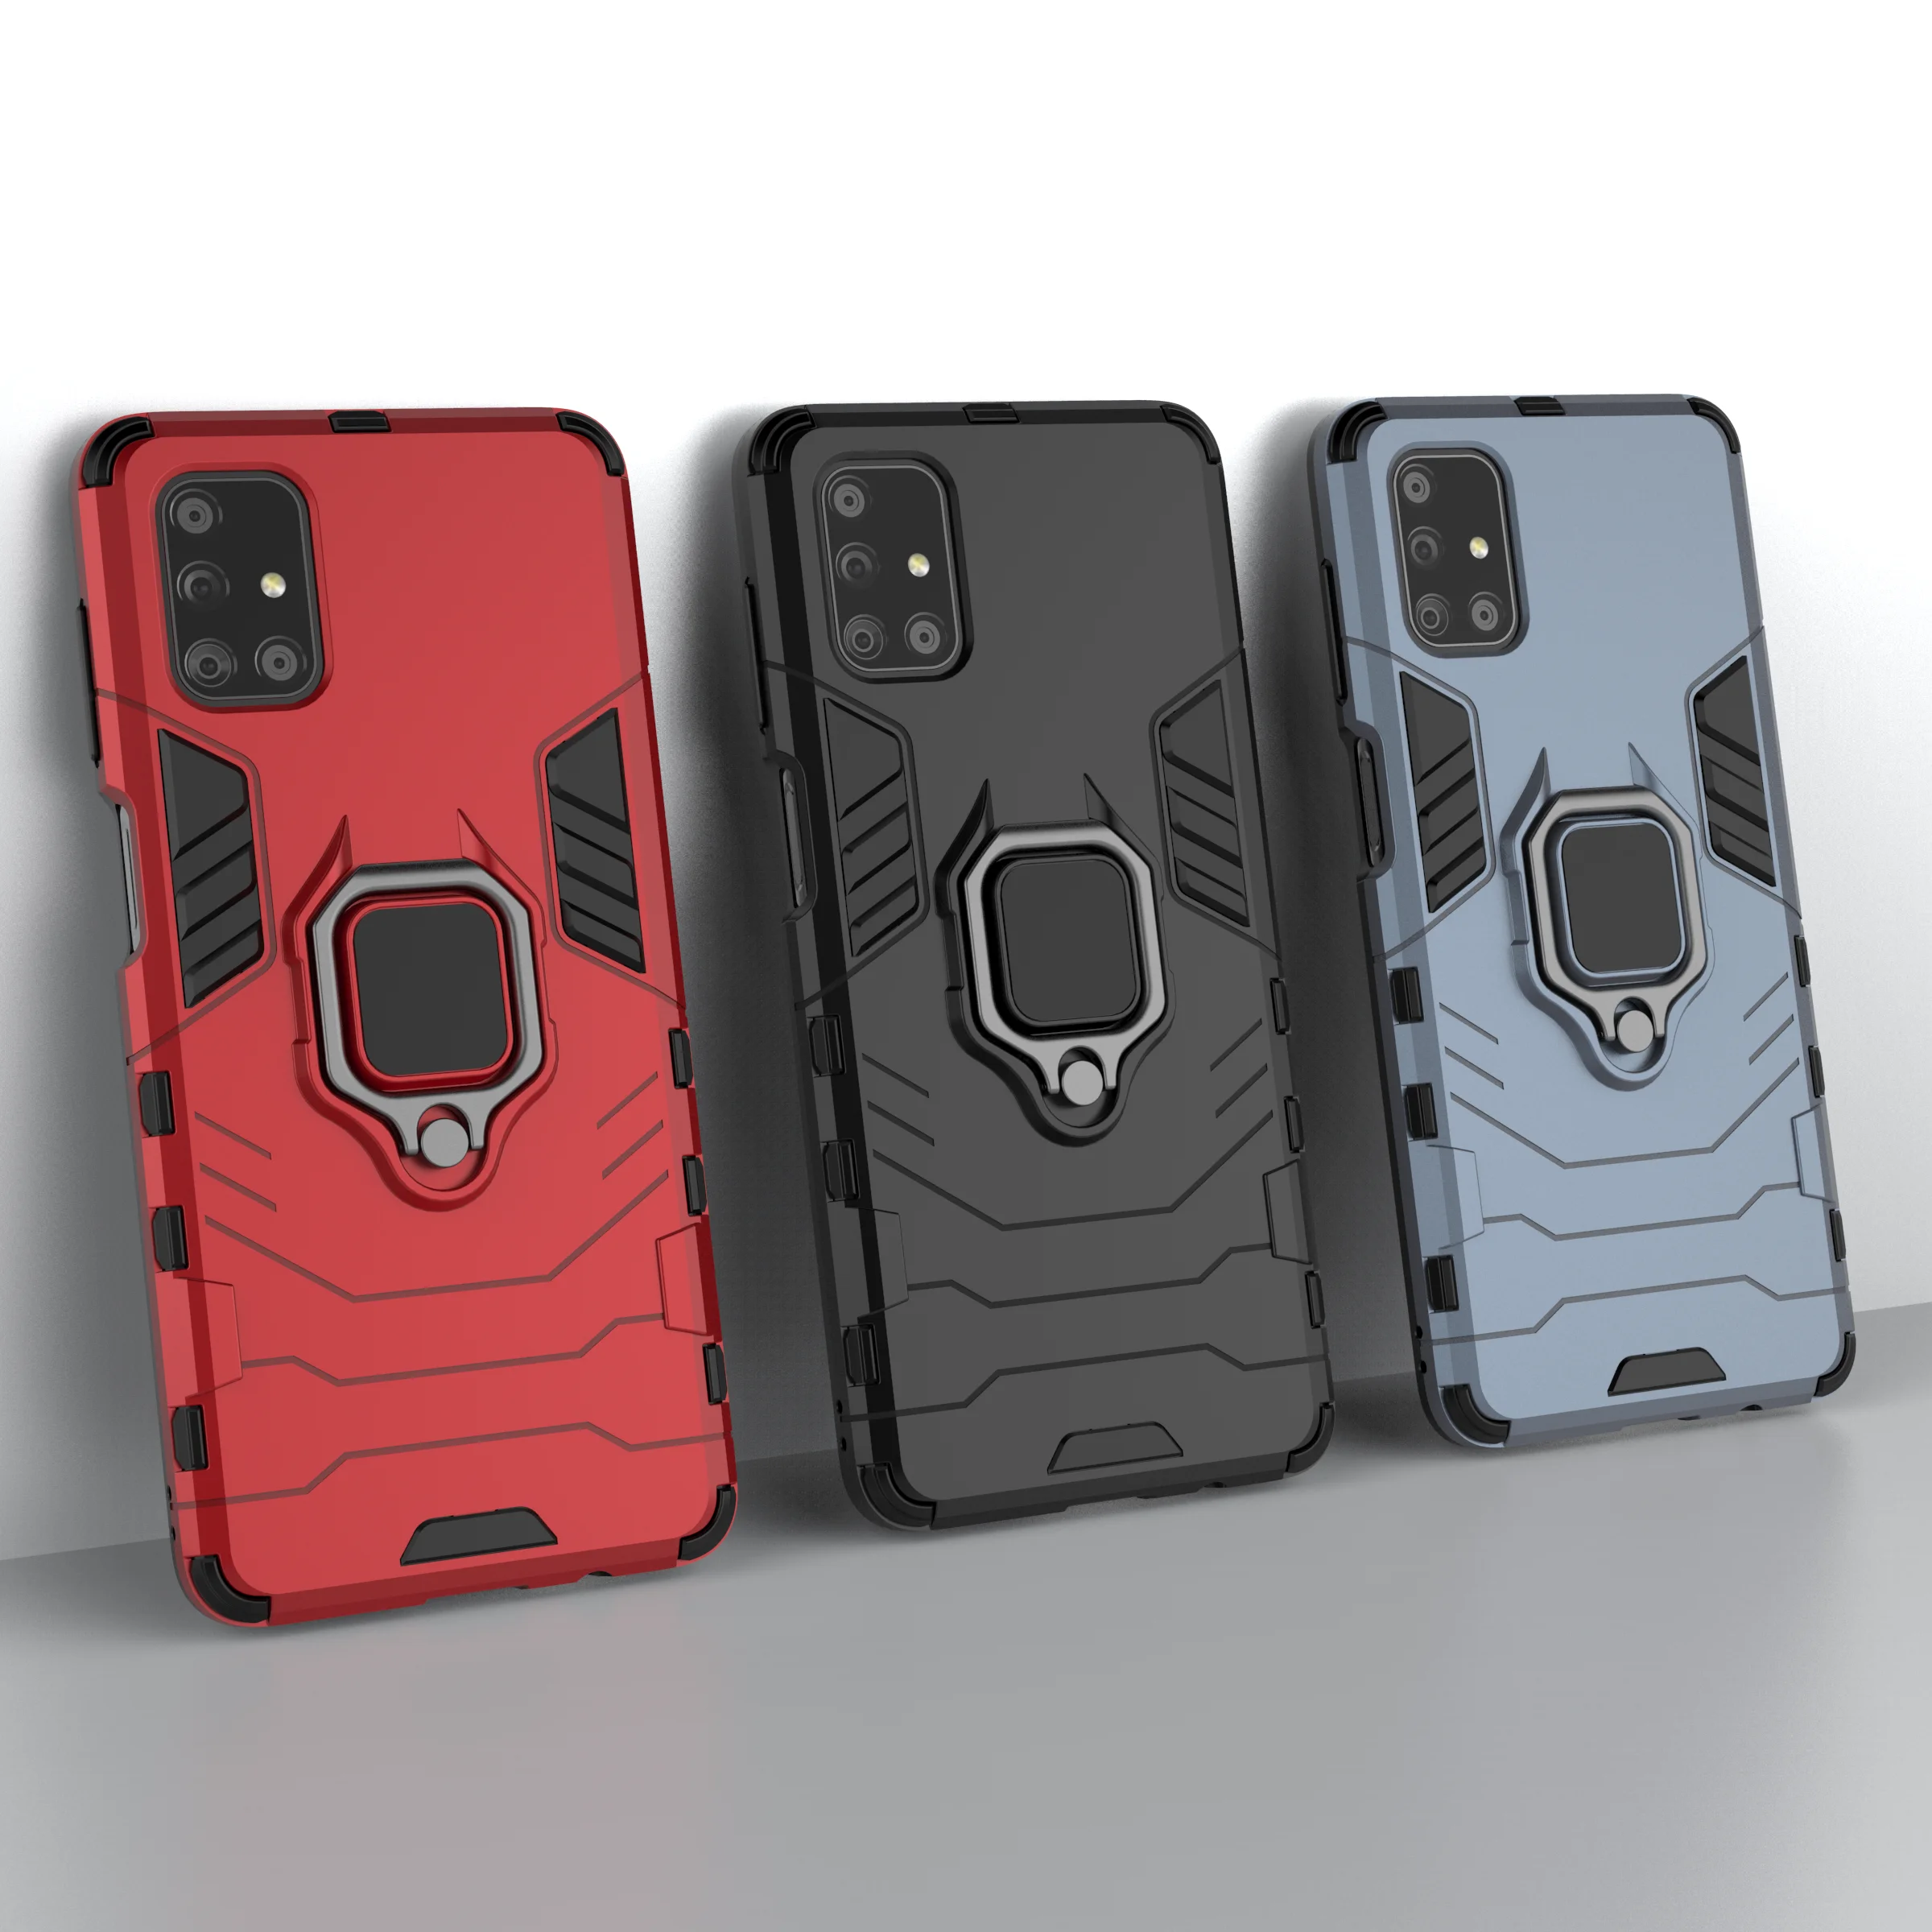 

Shockproof Armor Phone Case For Samsung Galaxy M31 M30S M10 M01 M31S M40 M30 M20 M11 M40S M51 M21 Rugged Metal Stand Back Cover